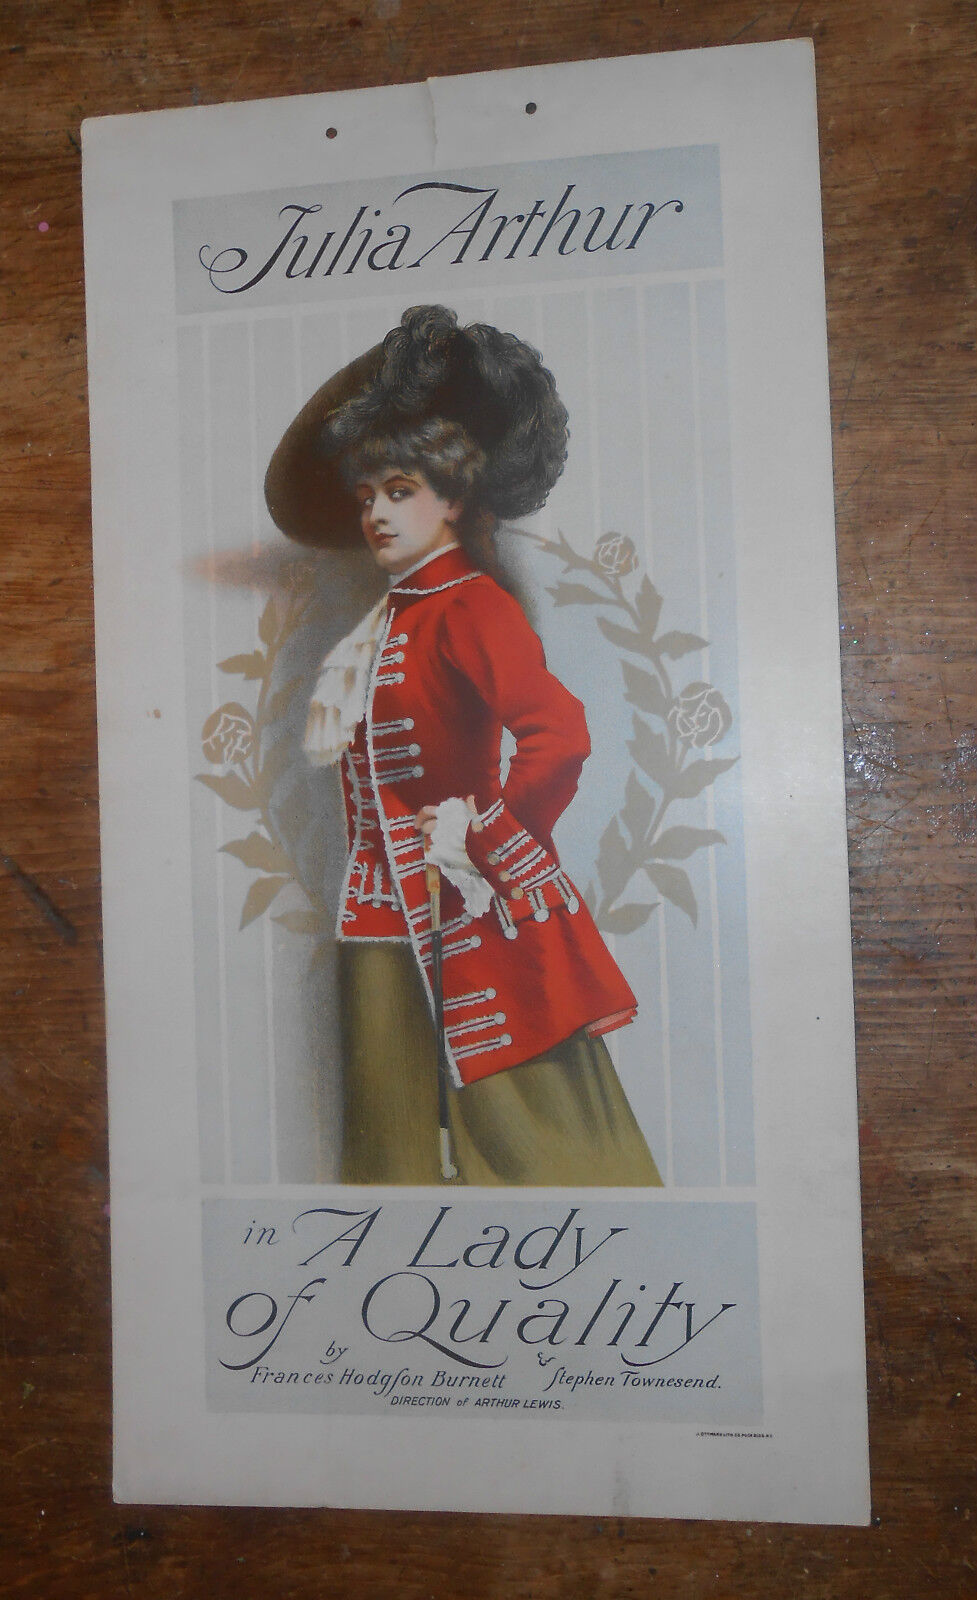 original 1897 lithographed sign Julia Arthur on A Lady of Quality